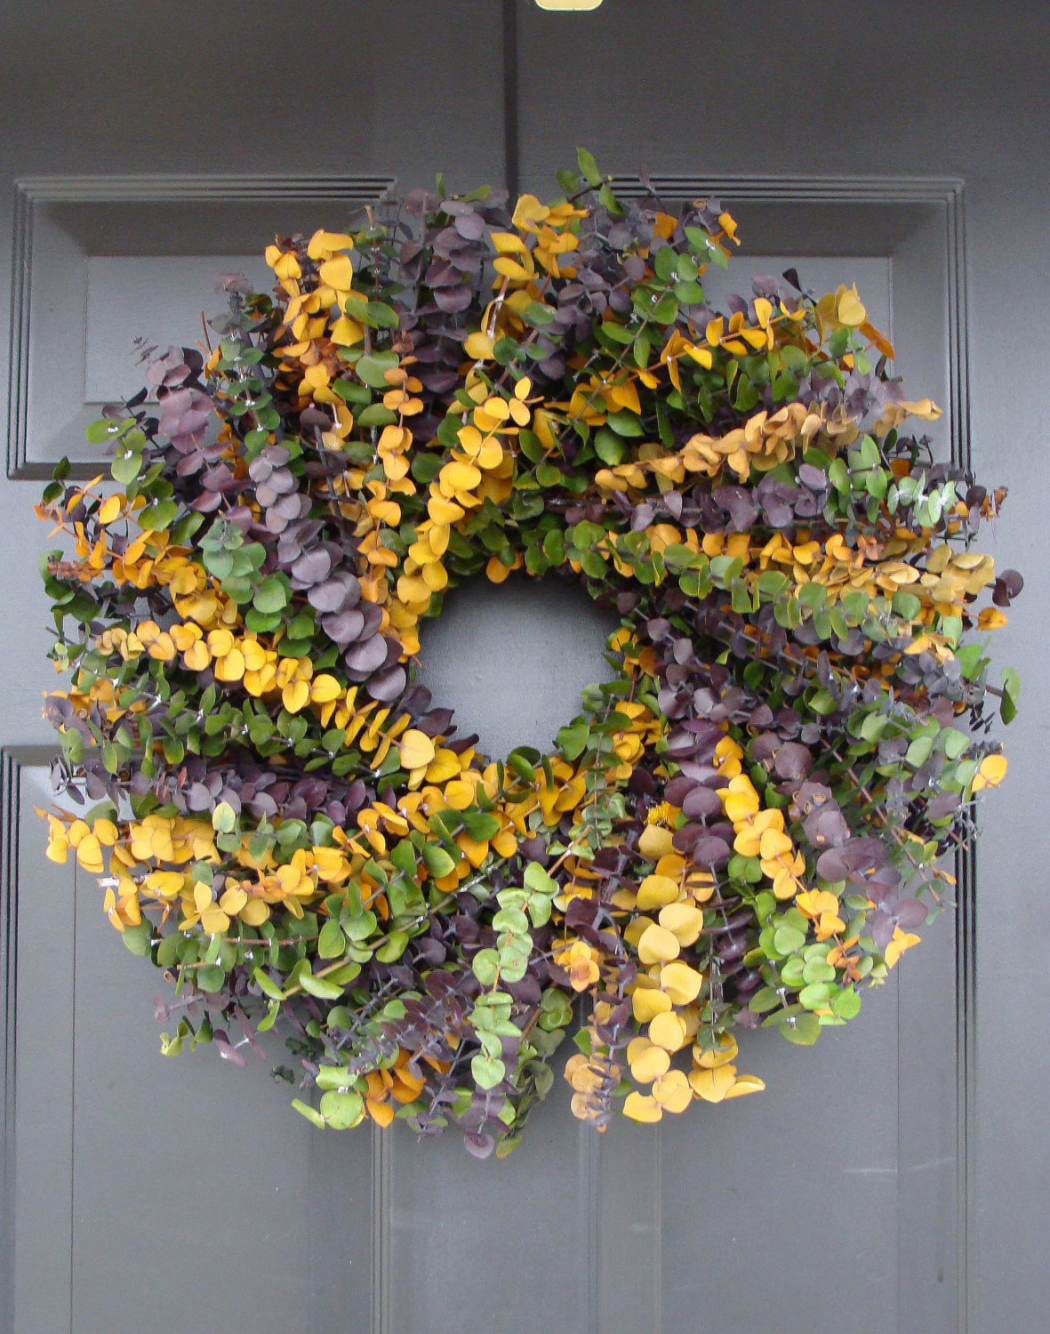 word-image-11 Fat Tuesday is Coming! 11 Classy Mardis Gras Wreaths for Your Front Door